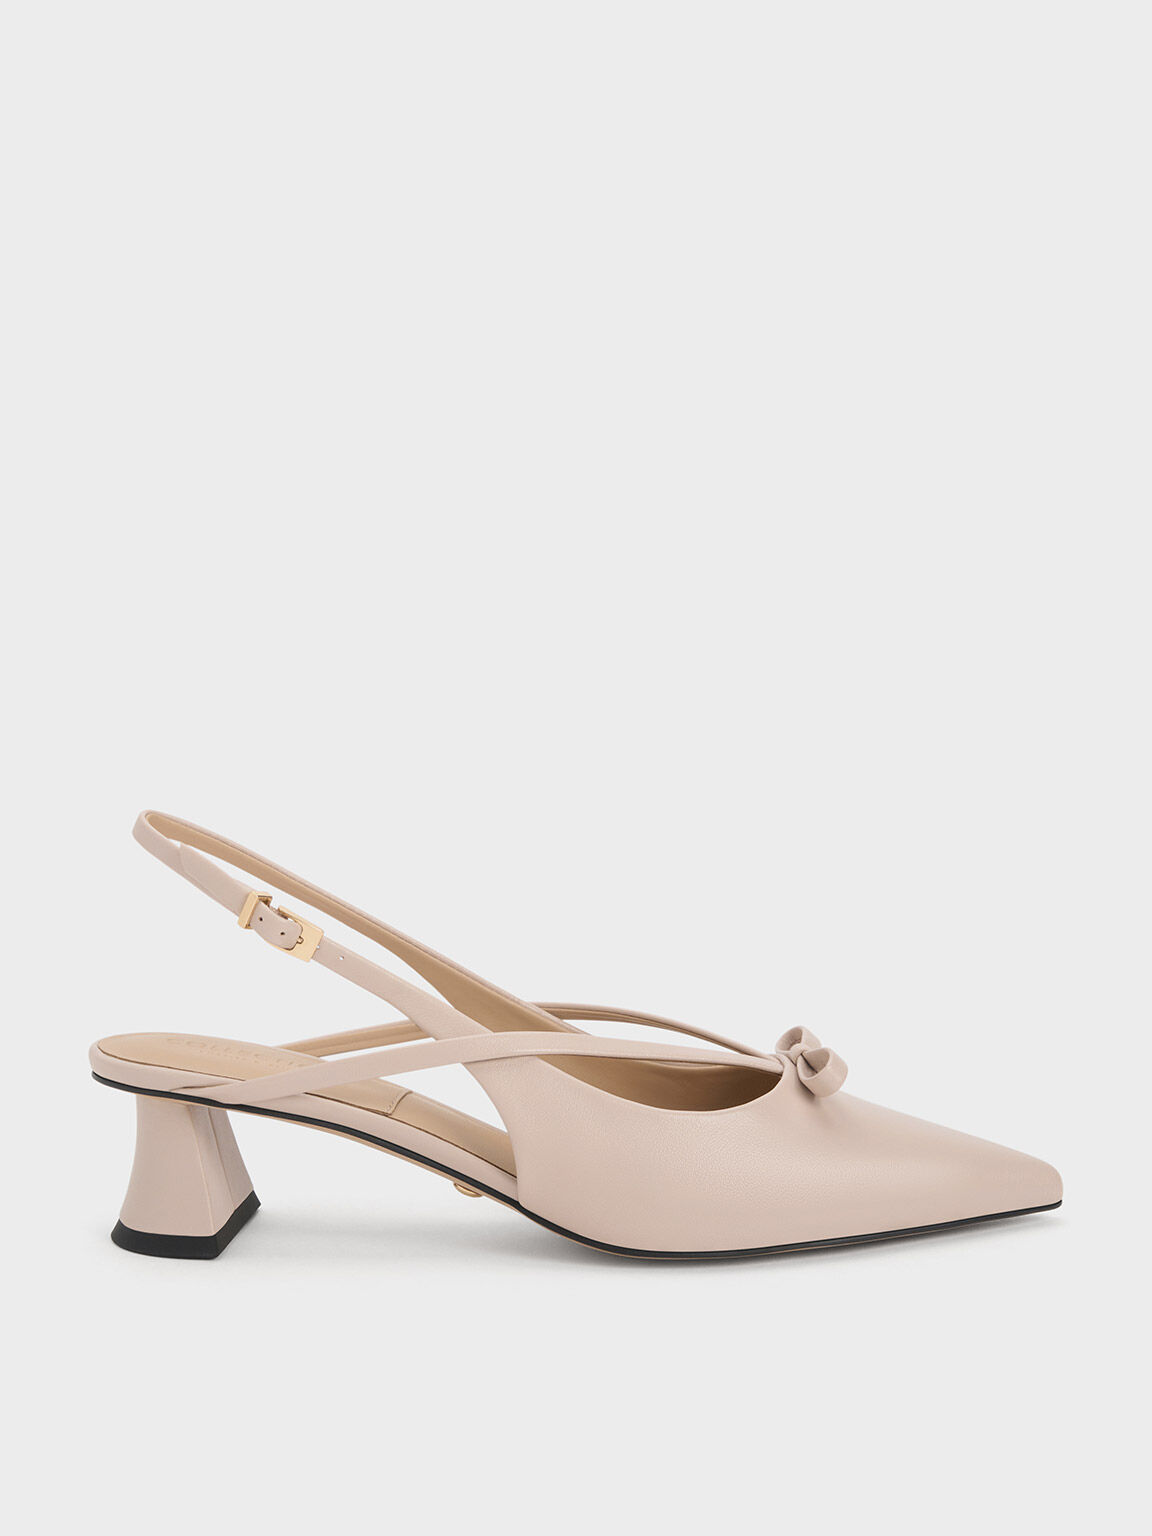 Leather Bow Strappy Slingback Pumps, Nude, hi-res